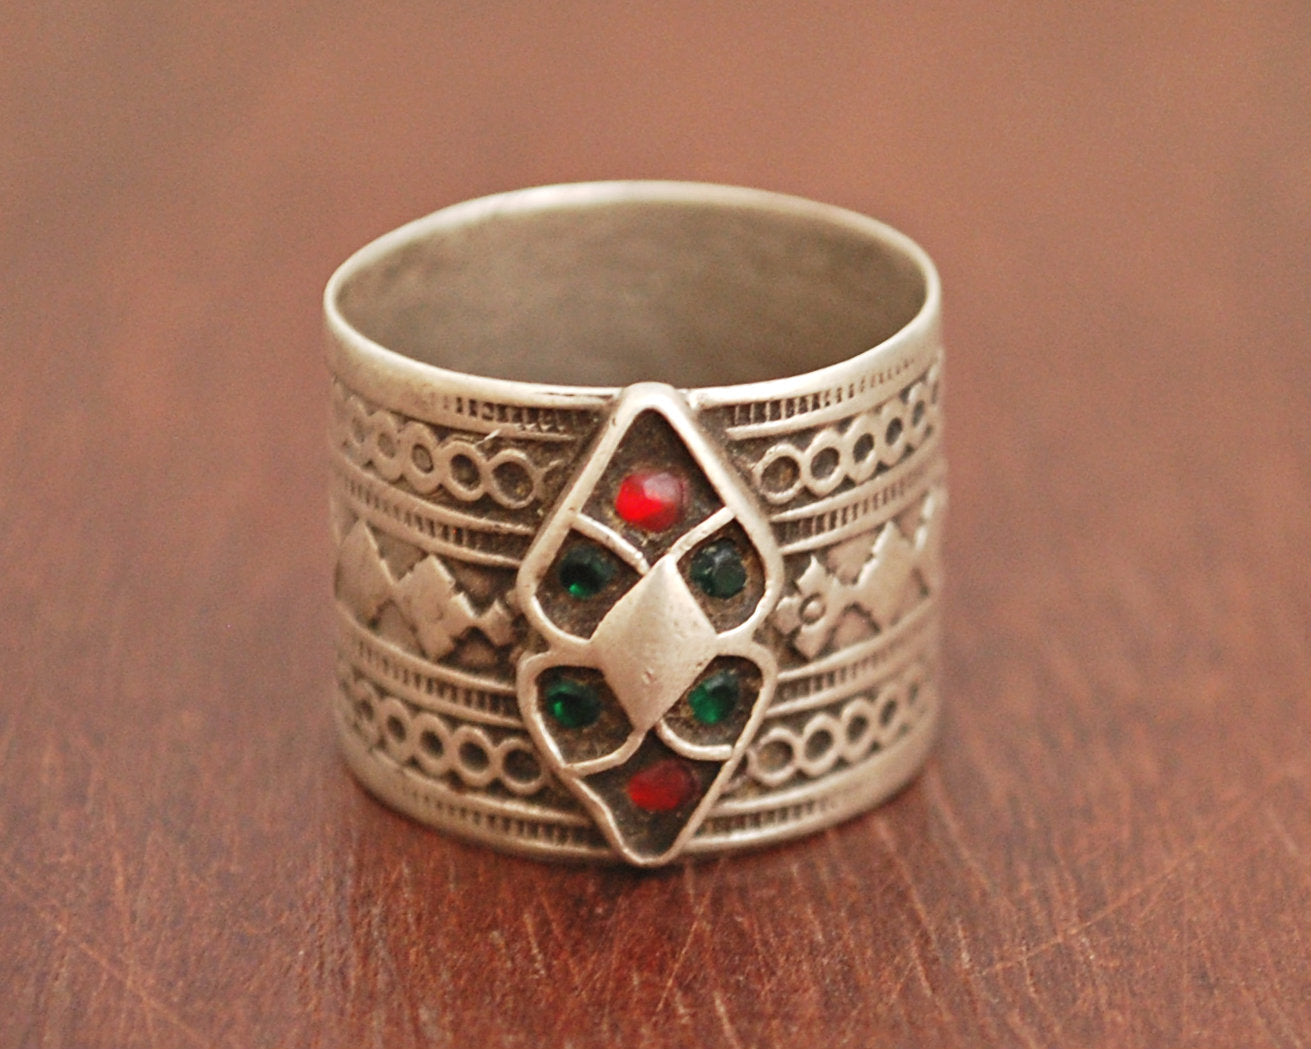 Antique Afghani Band Ring  with Glass Stones - Size 6.5